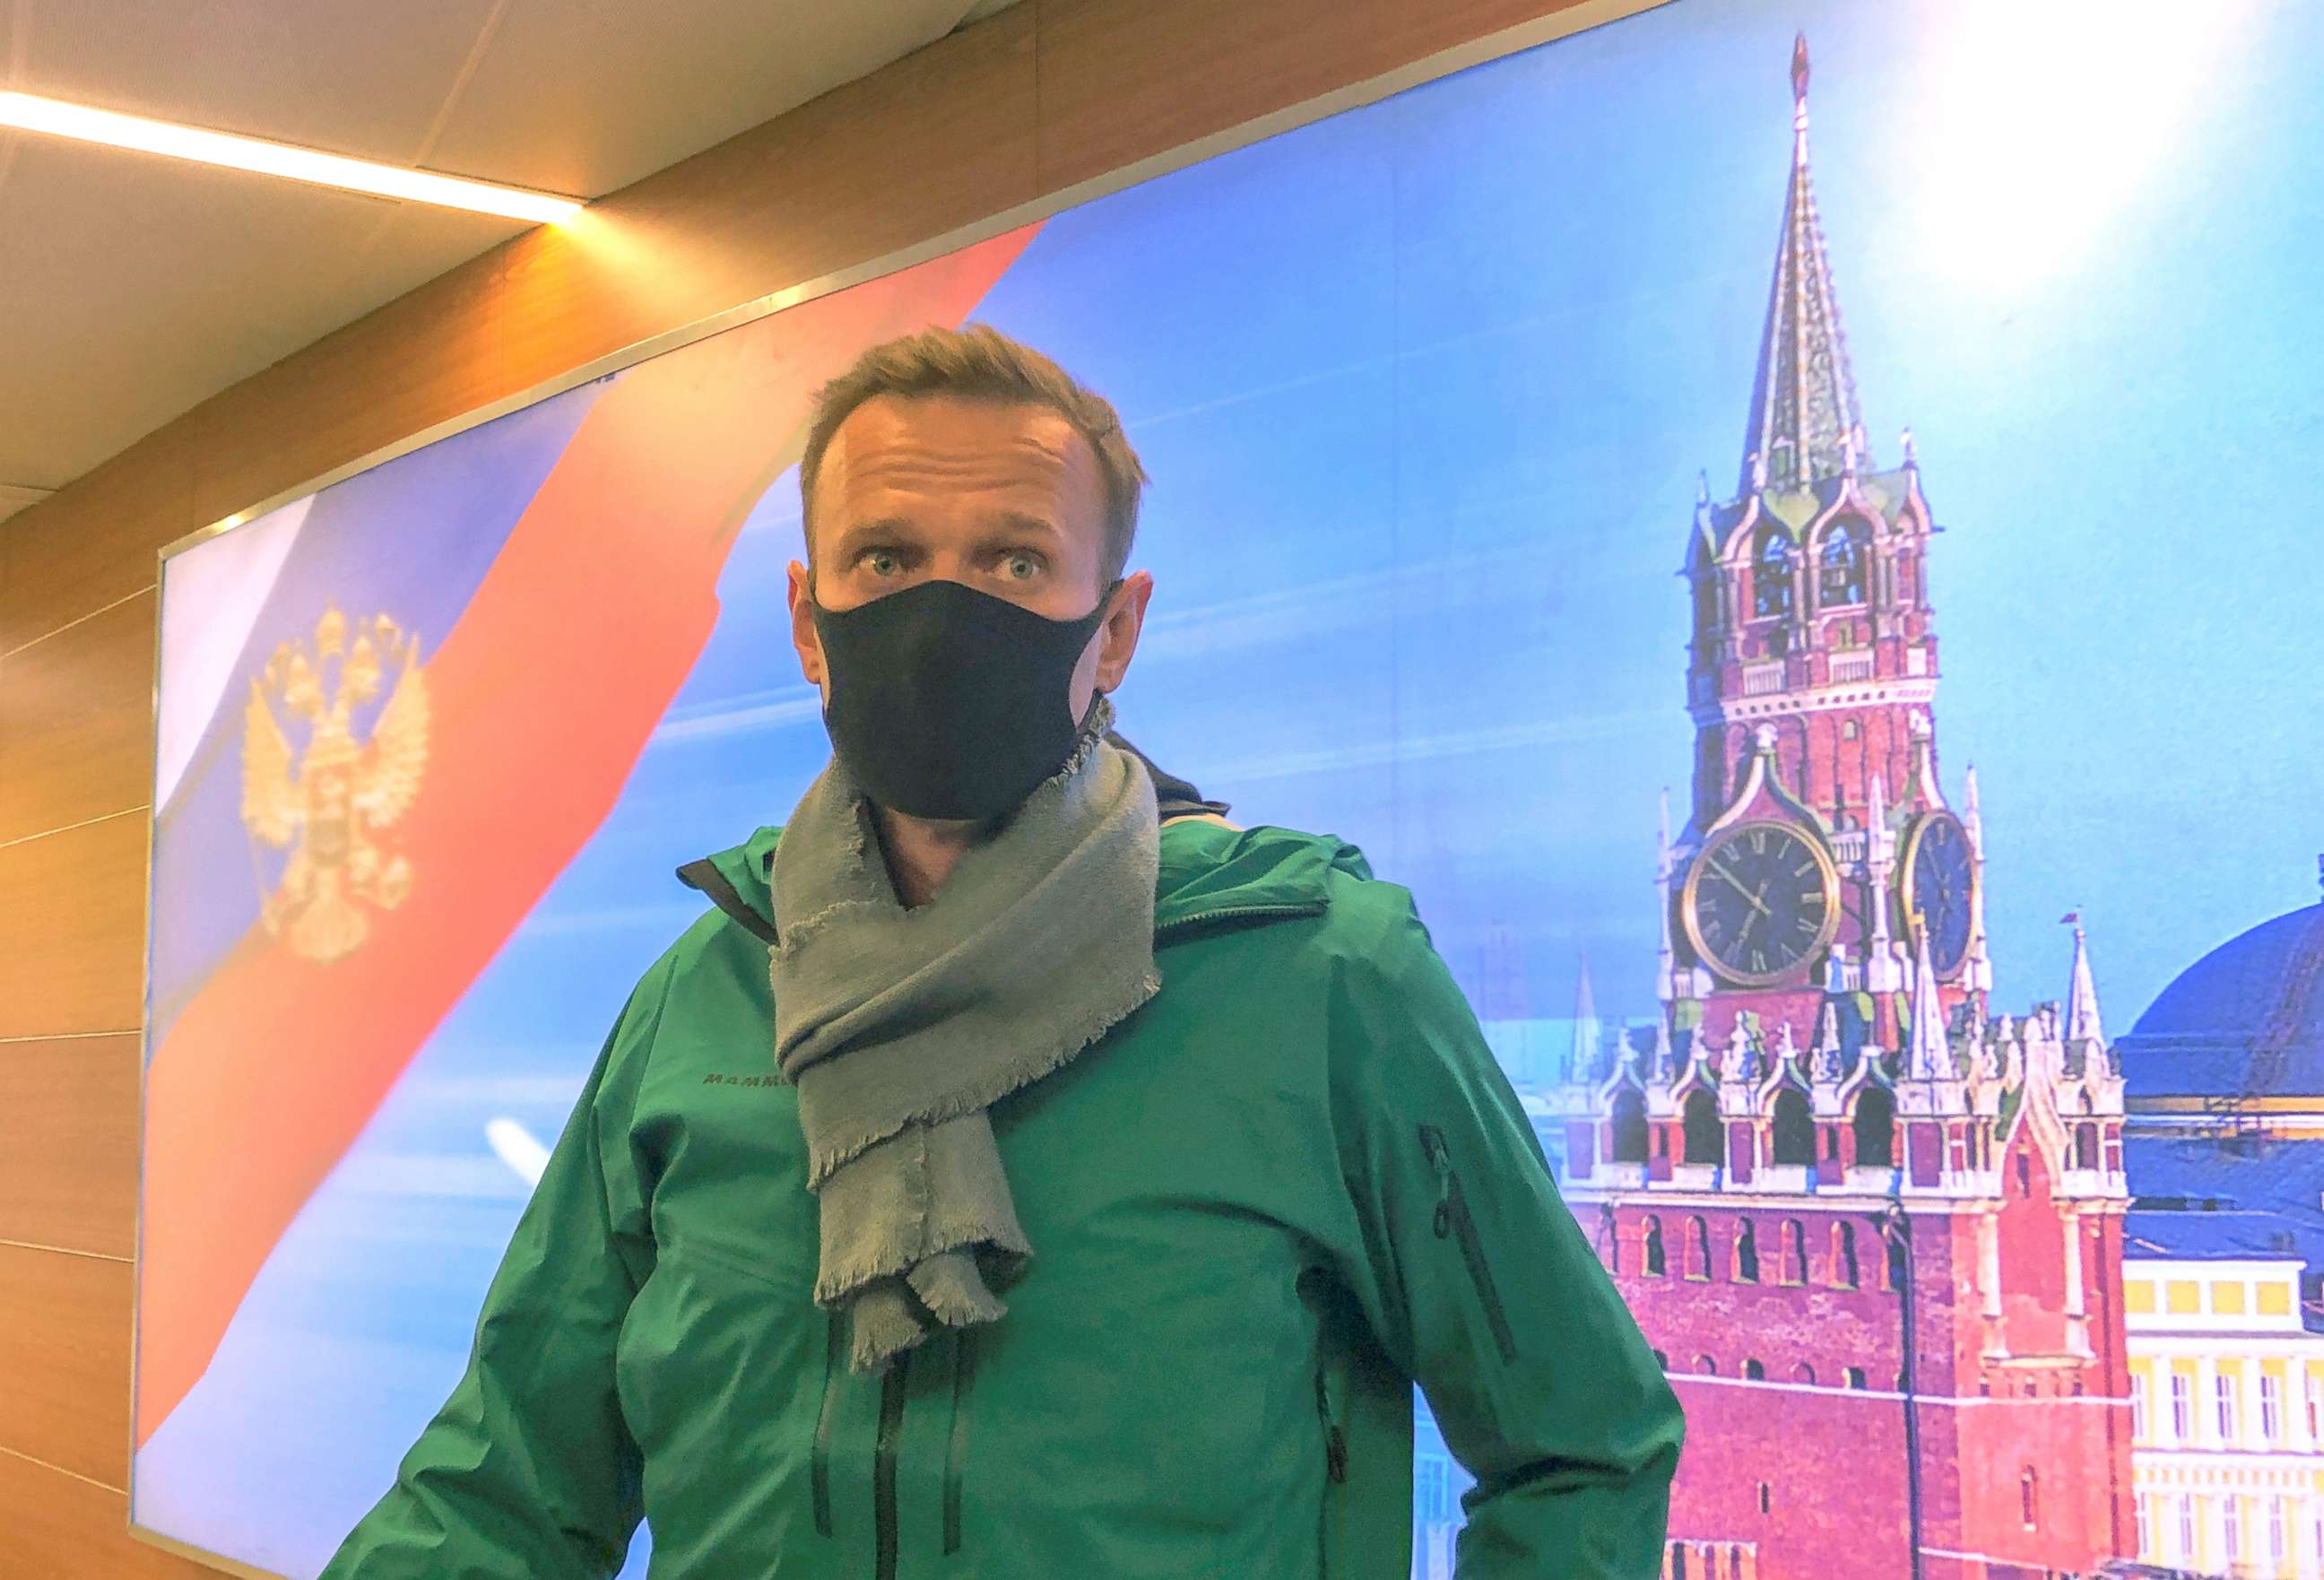 PHOTO: Russian opposition leader Alexei Navalny speaks with journalists upon the arrival at Sheremetyevo airport in Moscow, Jan. 17, 2021.